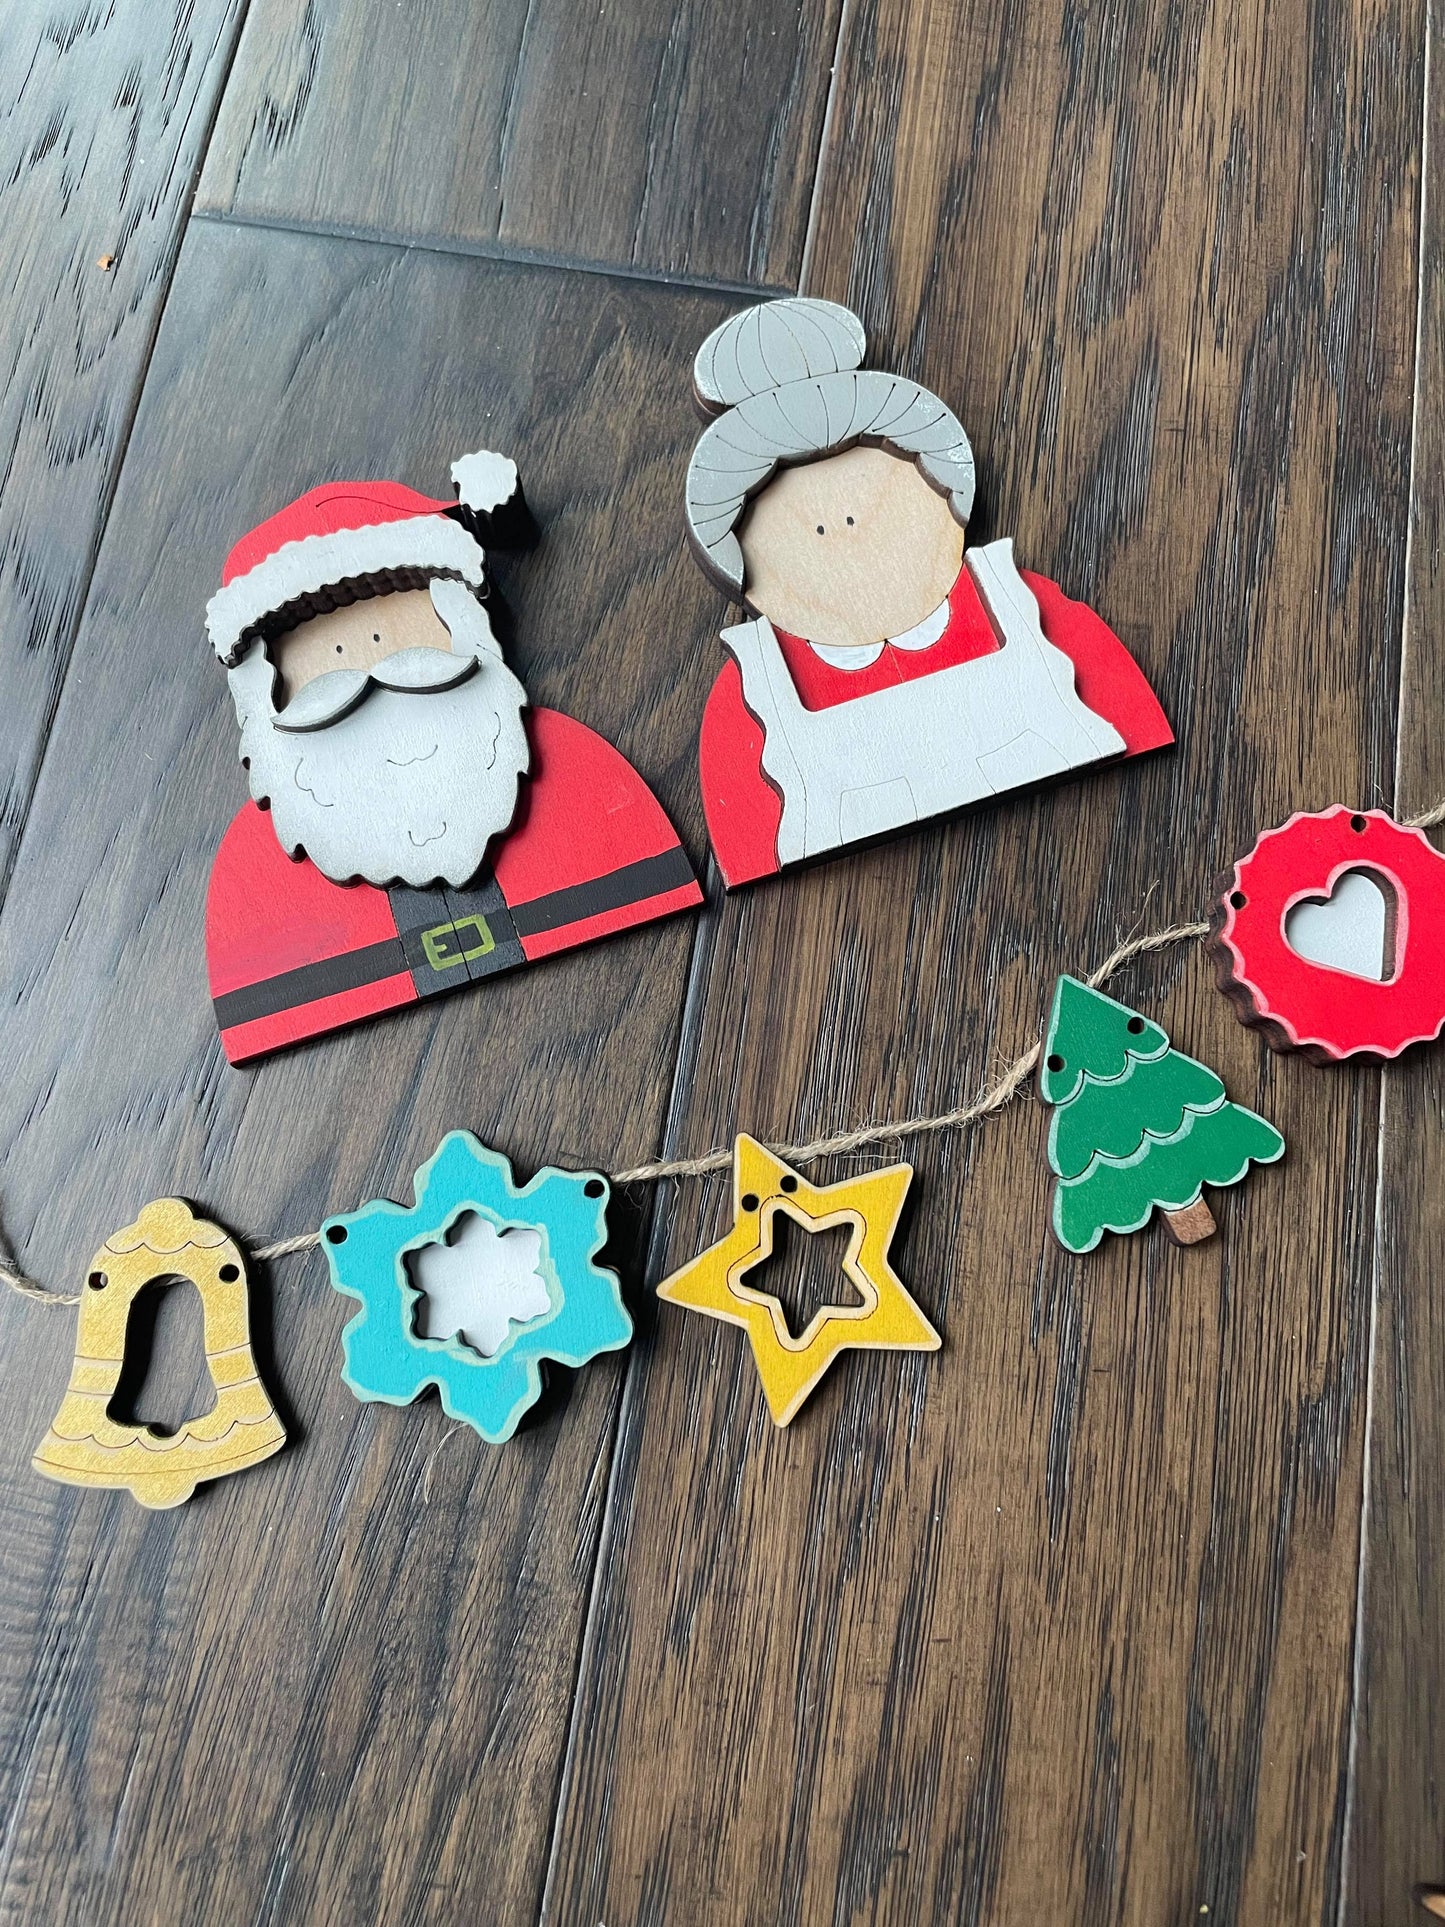 3D Tiered Tray Decor - Santa, Mrs Claus and Cookie banner